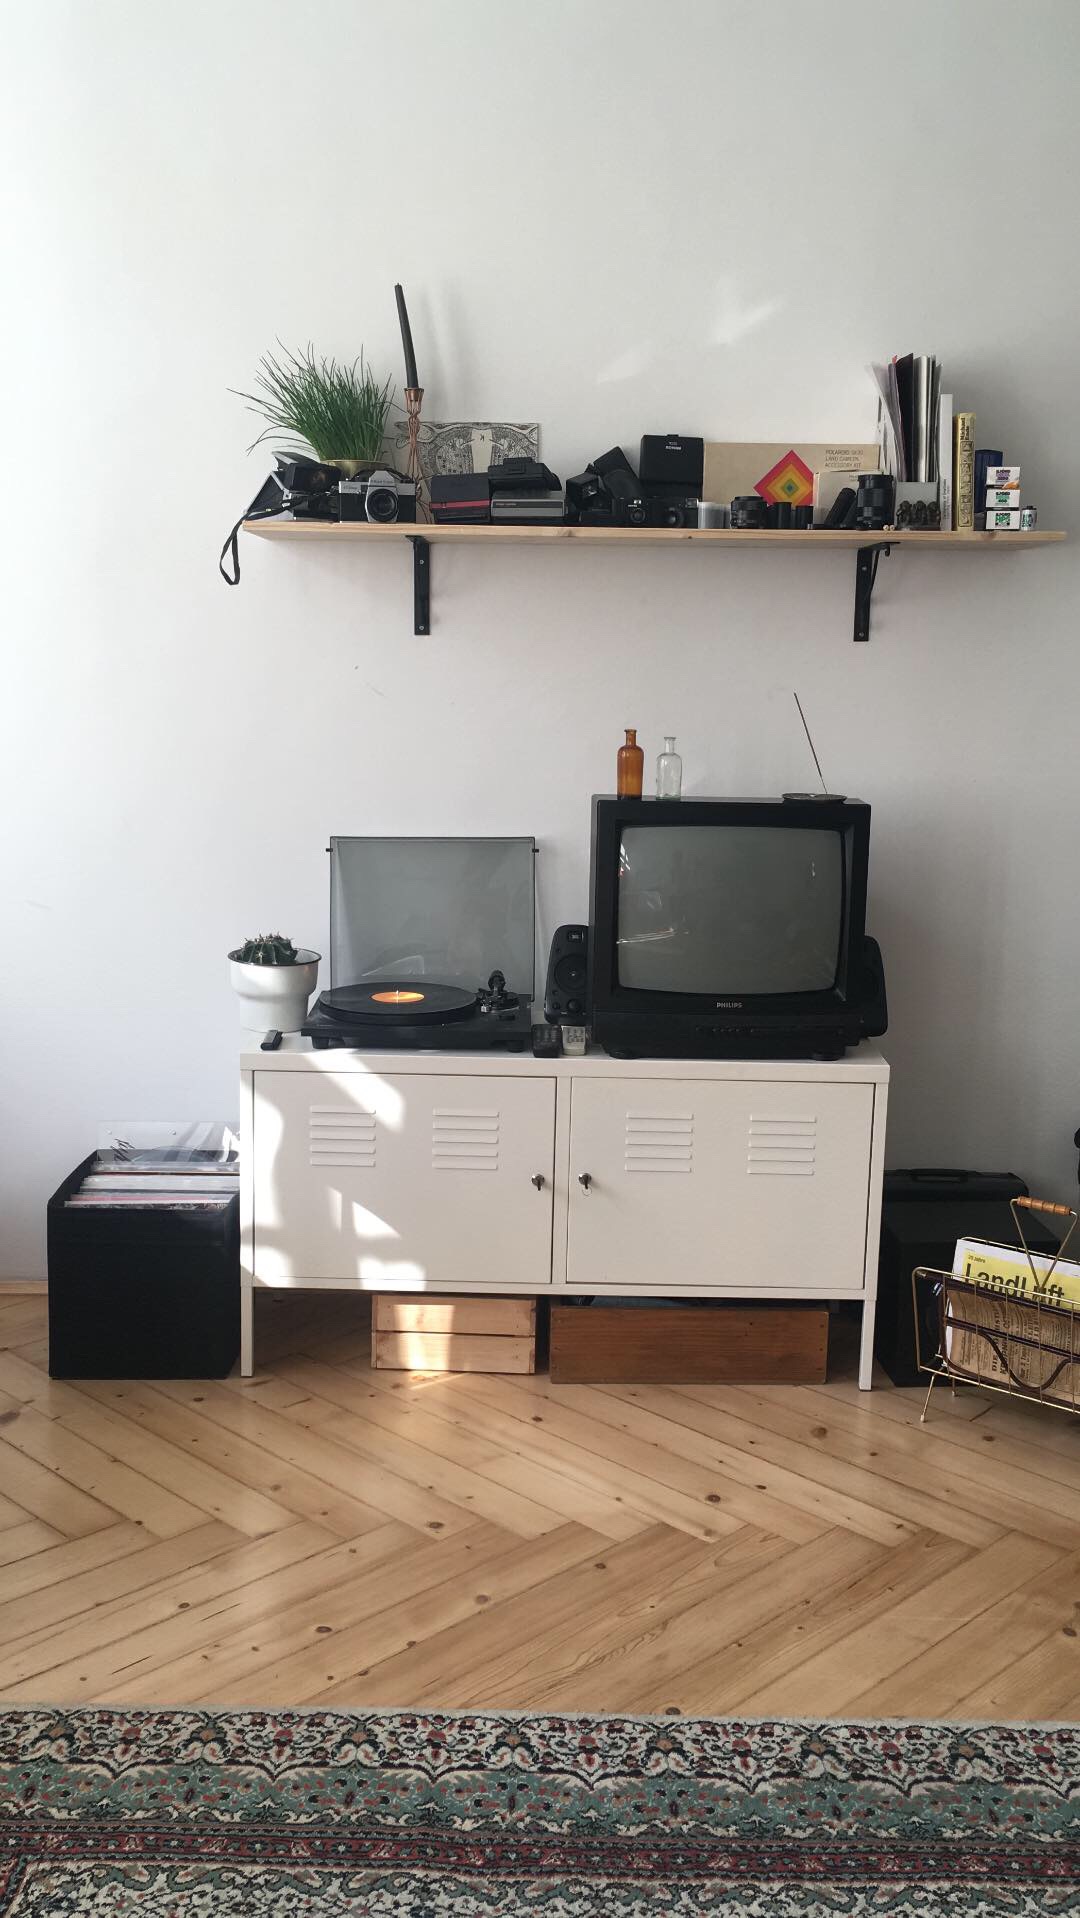 A box with television and record player on it, a shelf above it